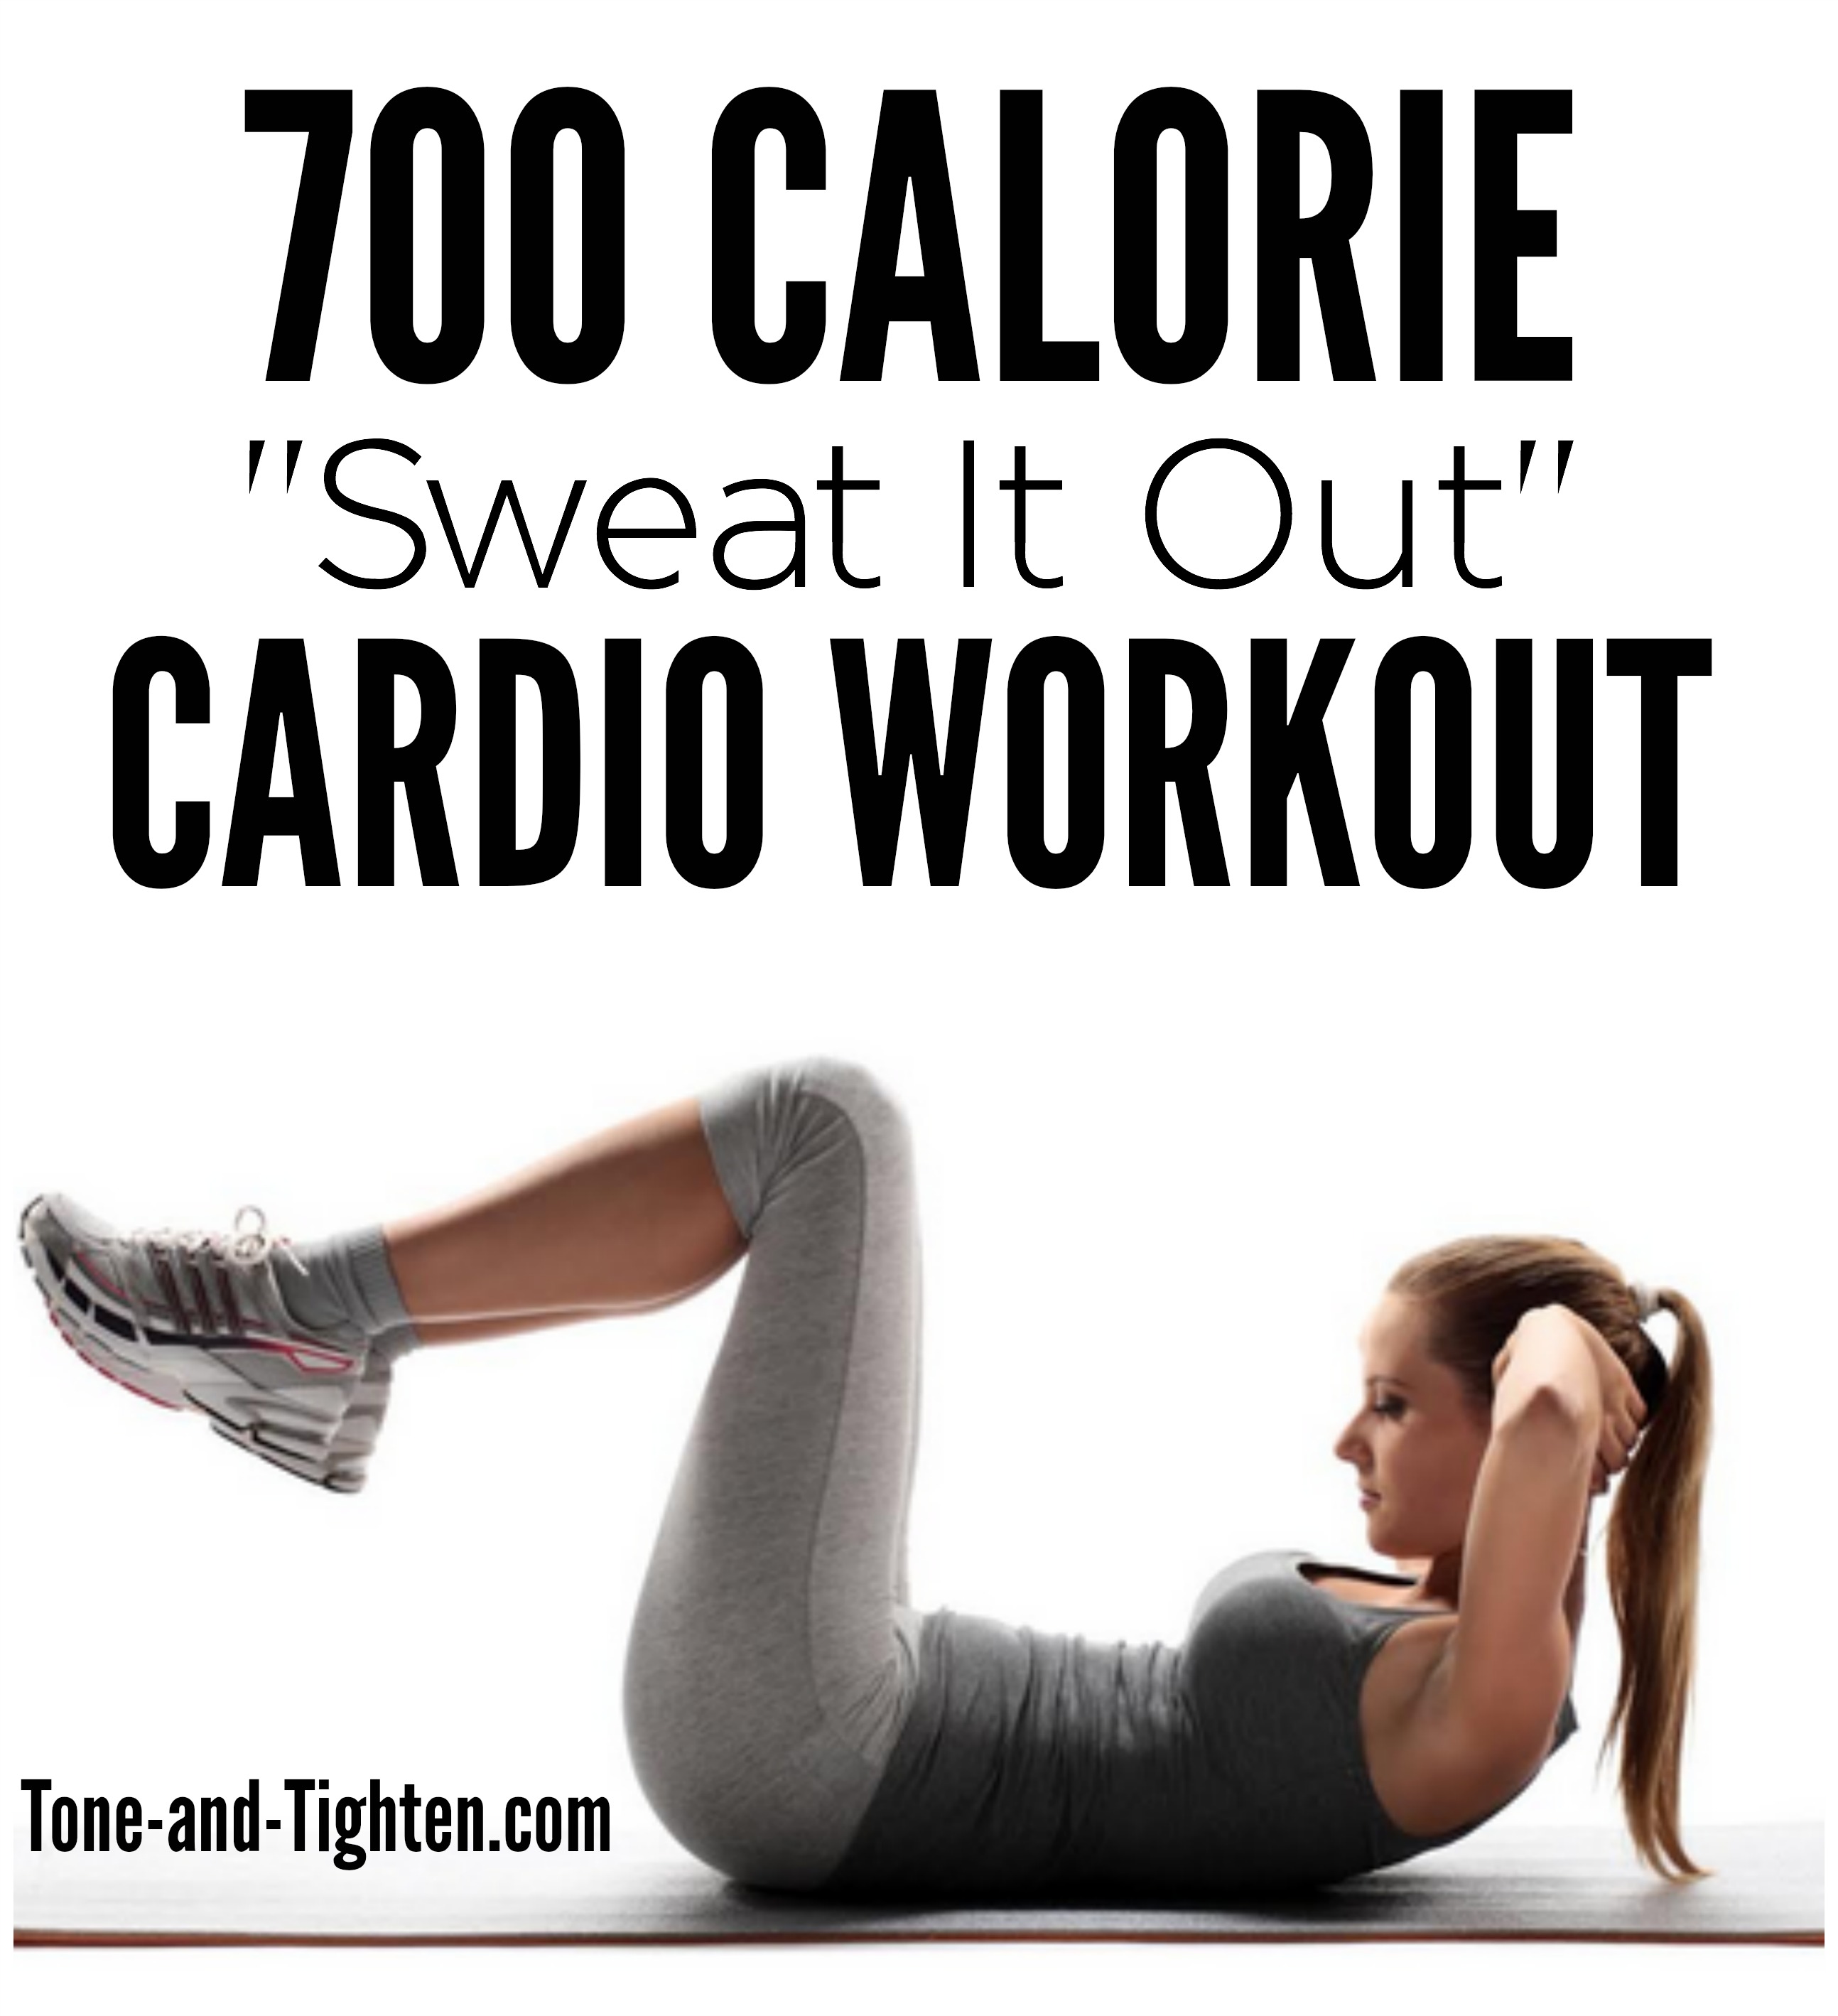 45 Minute Sweat It Out Cardio Workout (burns 700 calories)